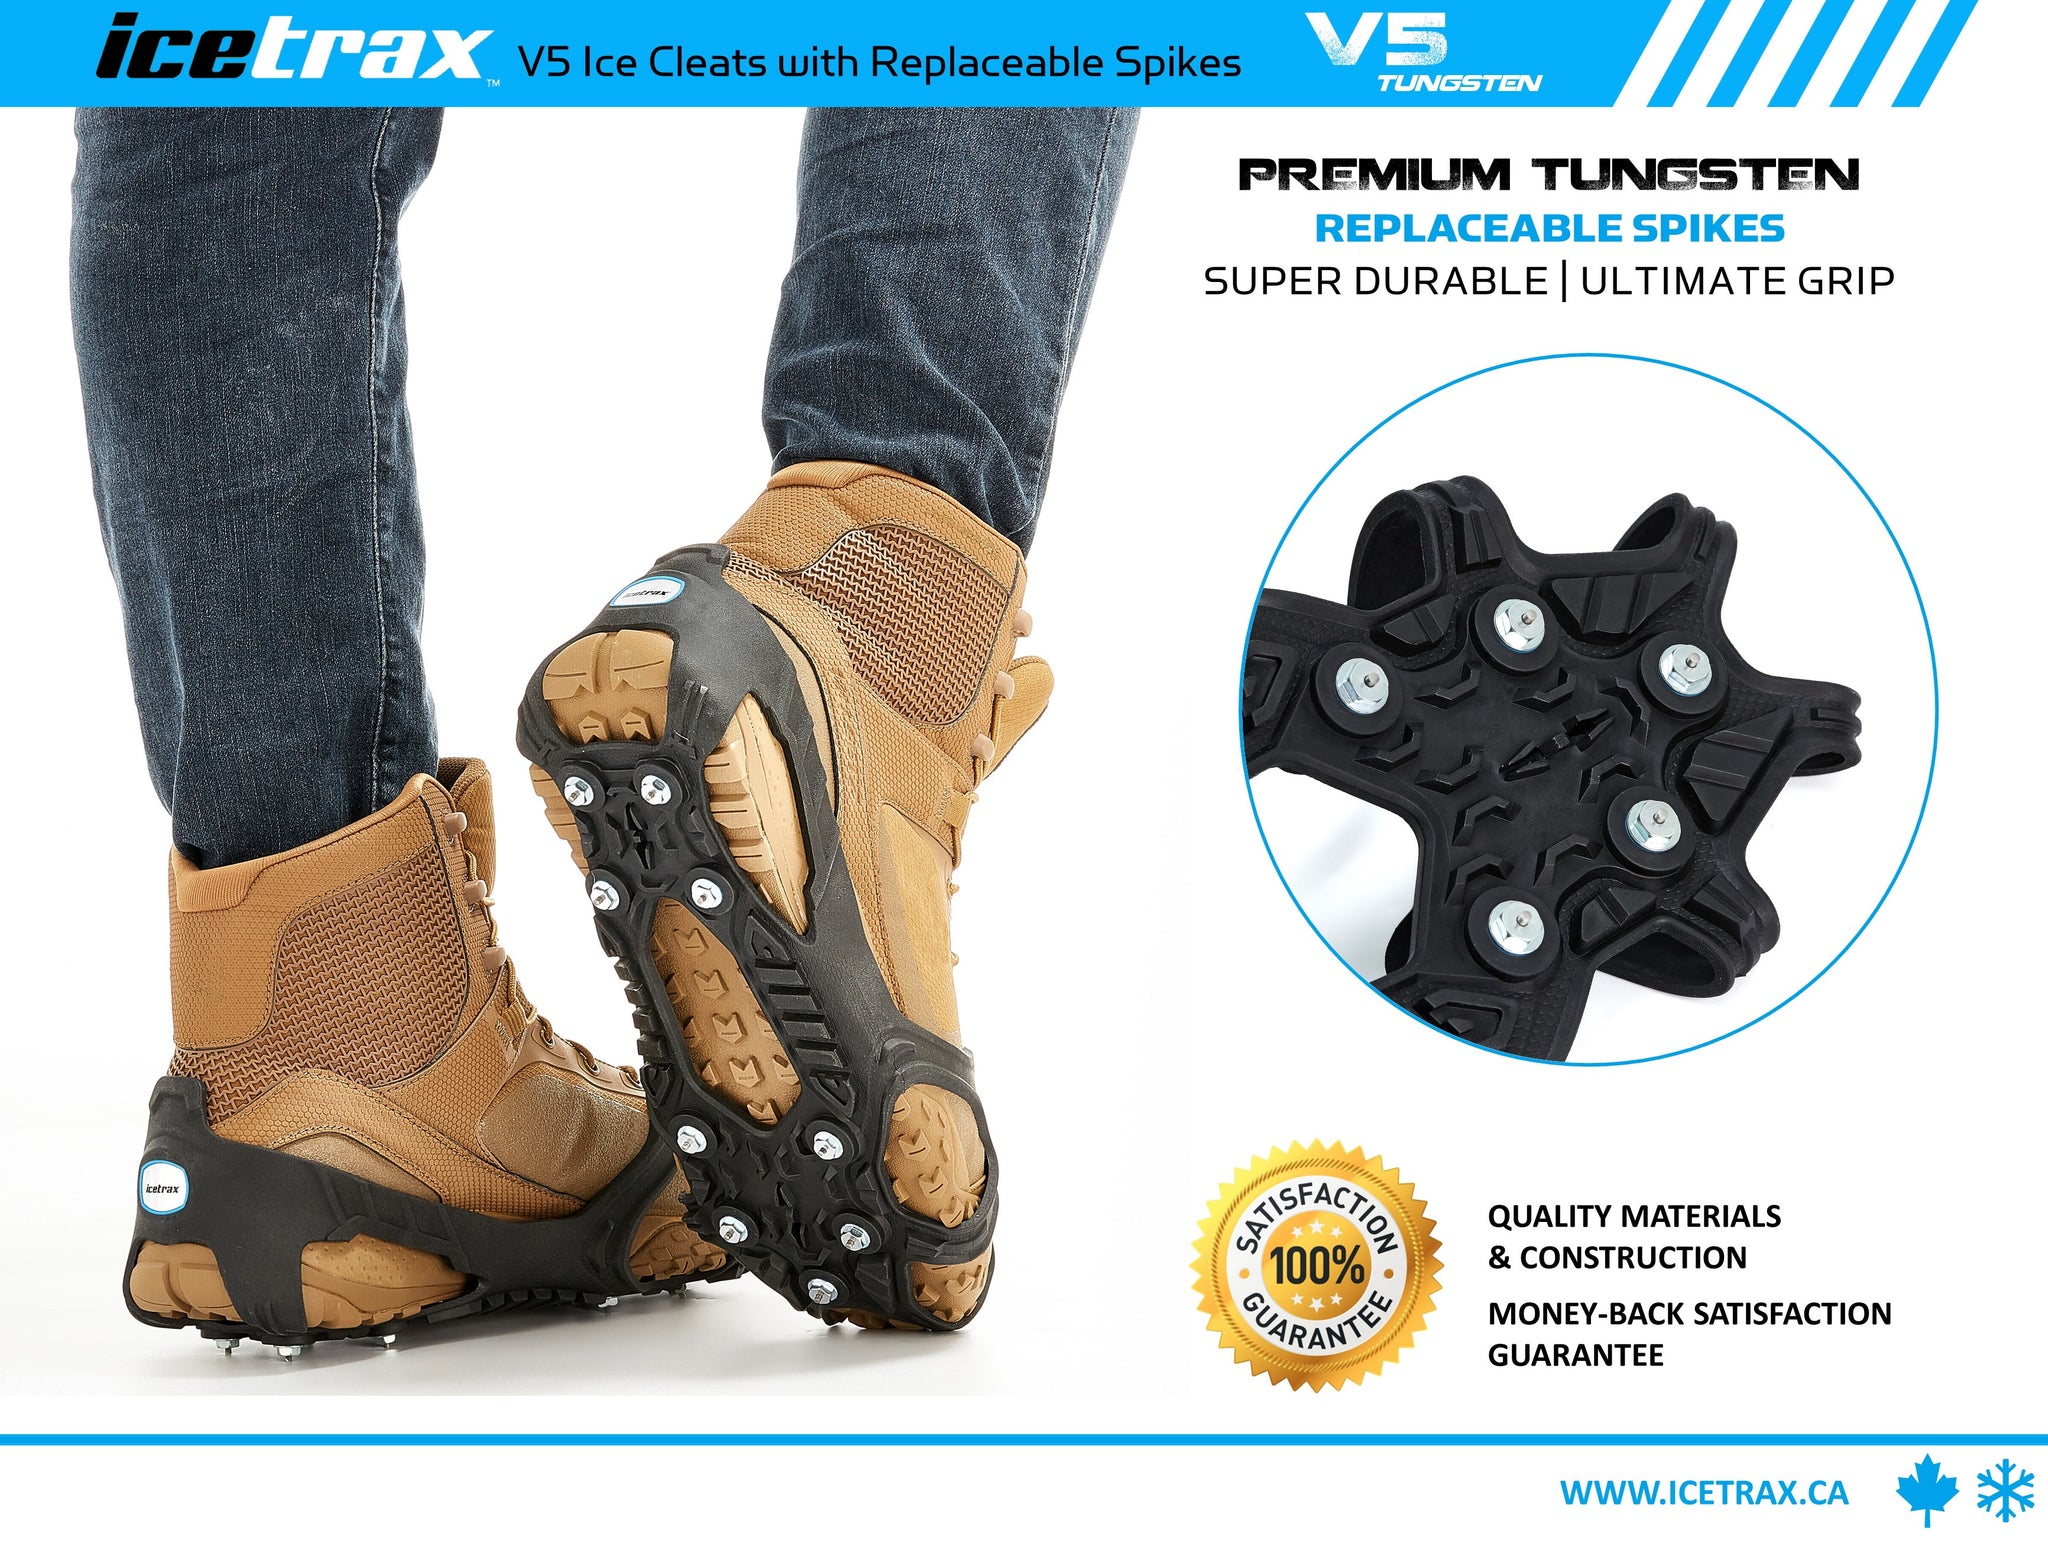 ICETRAX V5 Tungsten Ice Cleats with Replaceable Spikes - ICETRAX USA